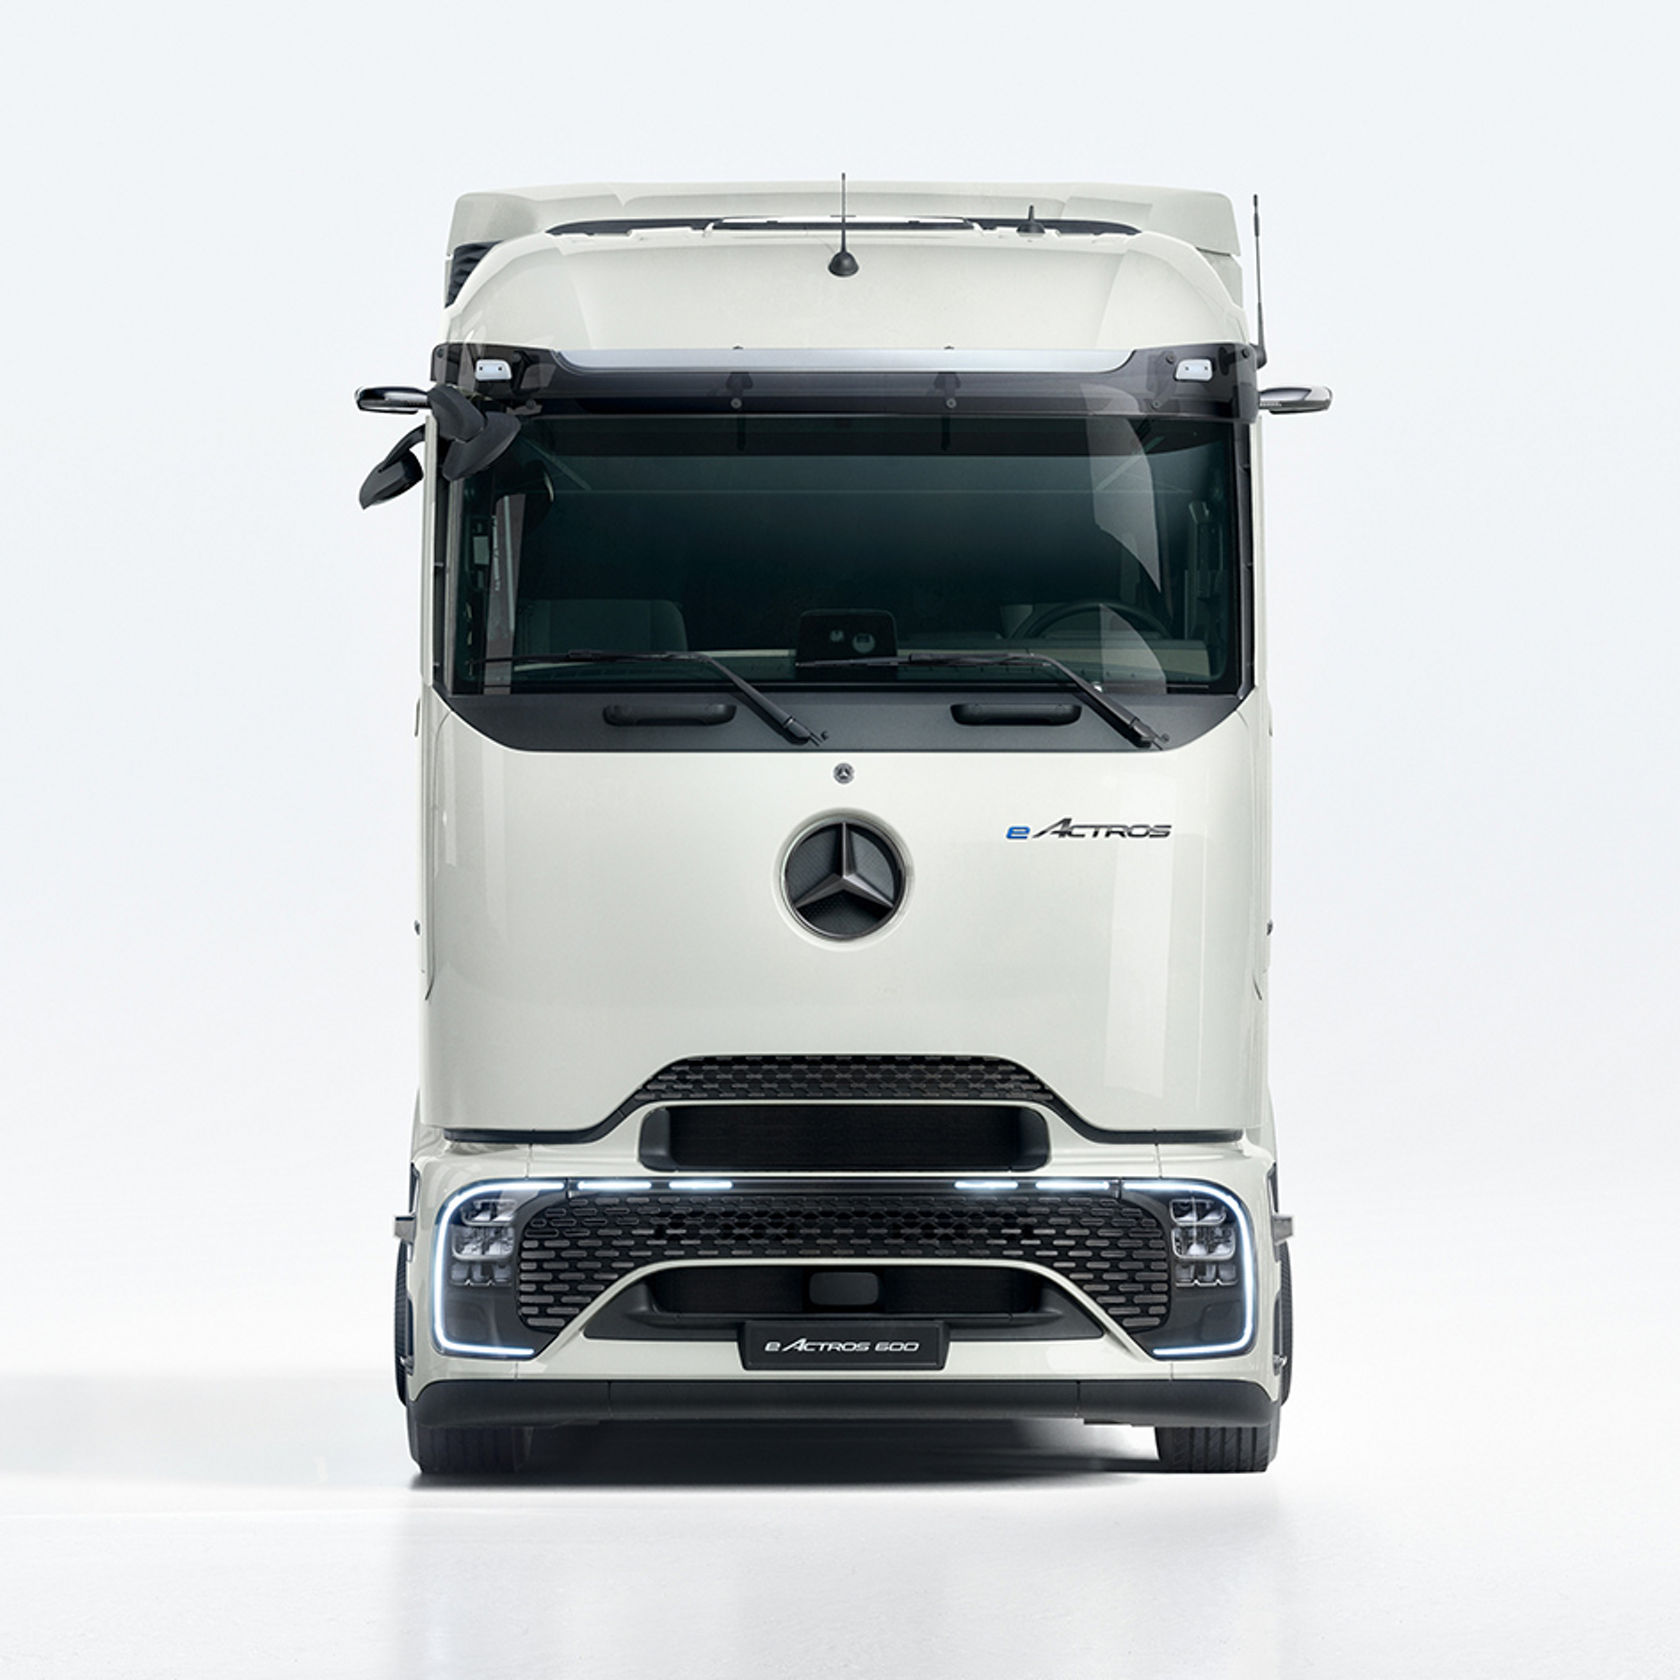 The eActros 600 in detail